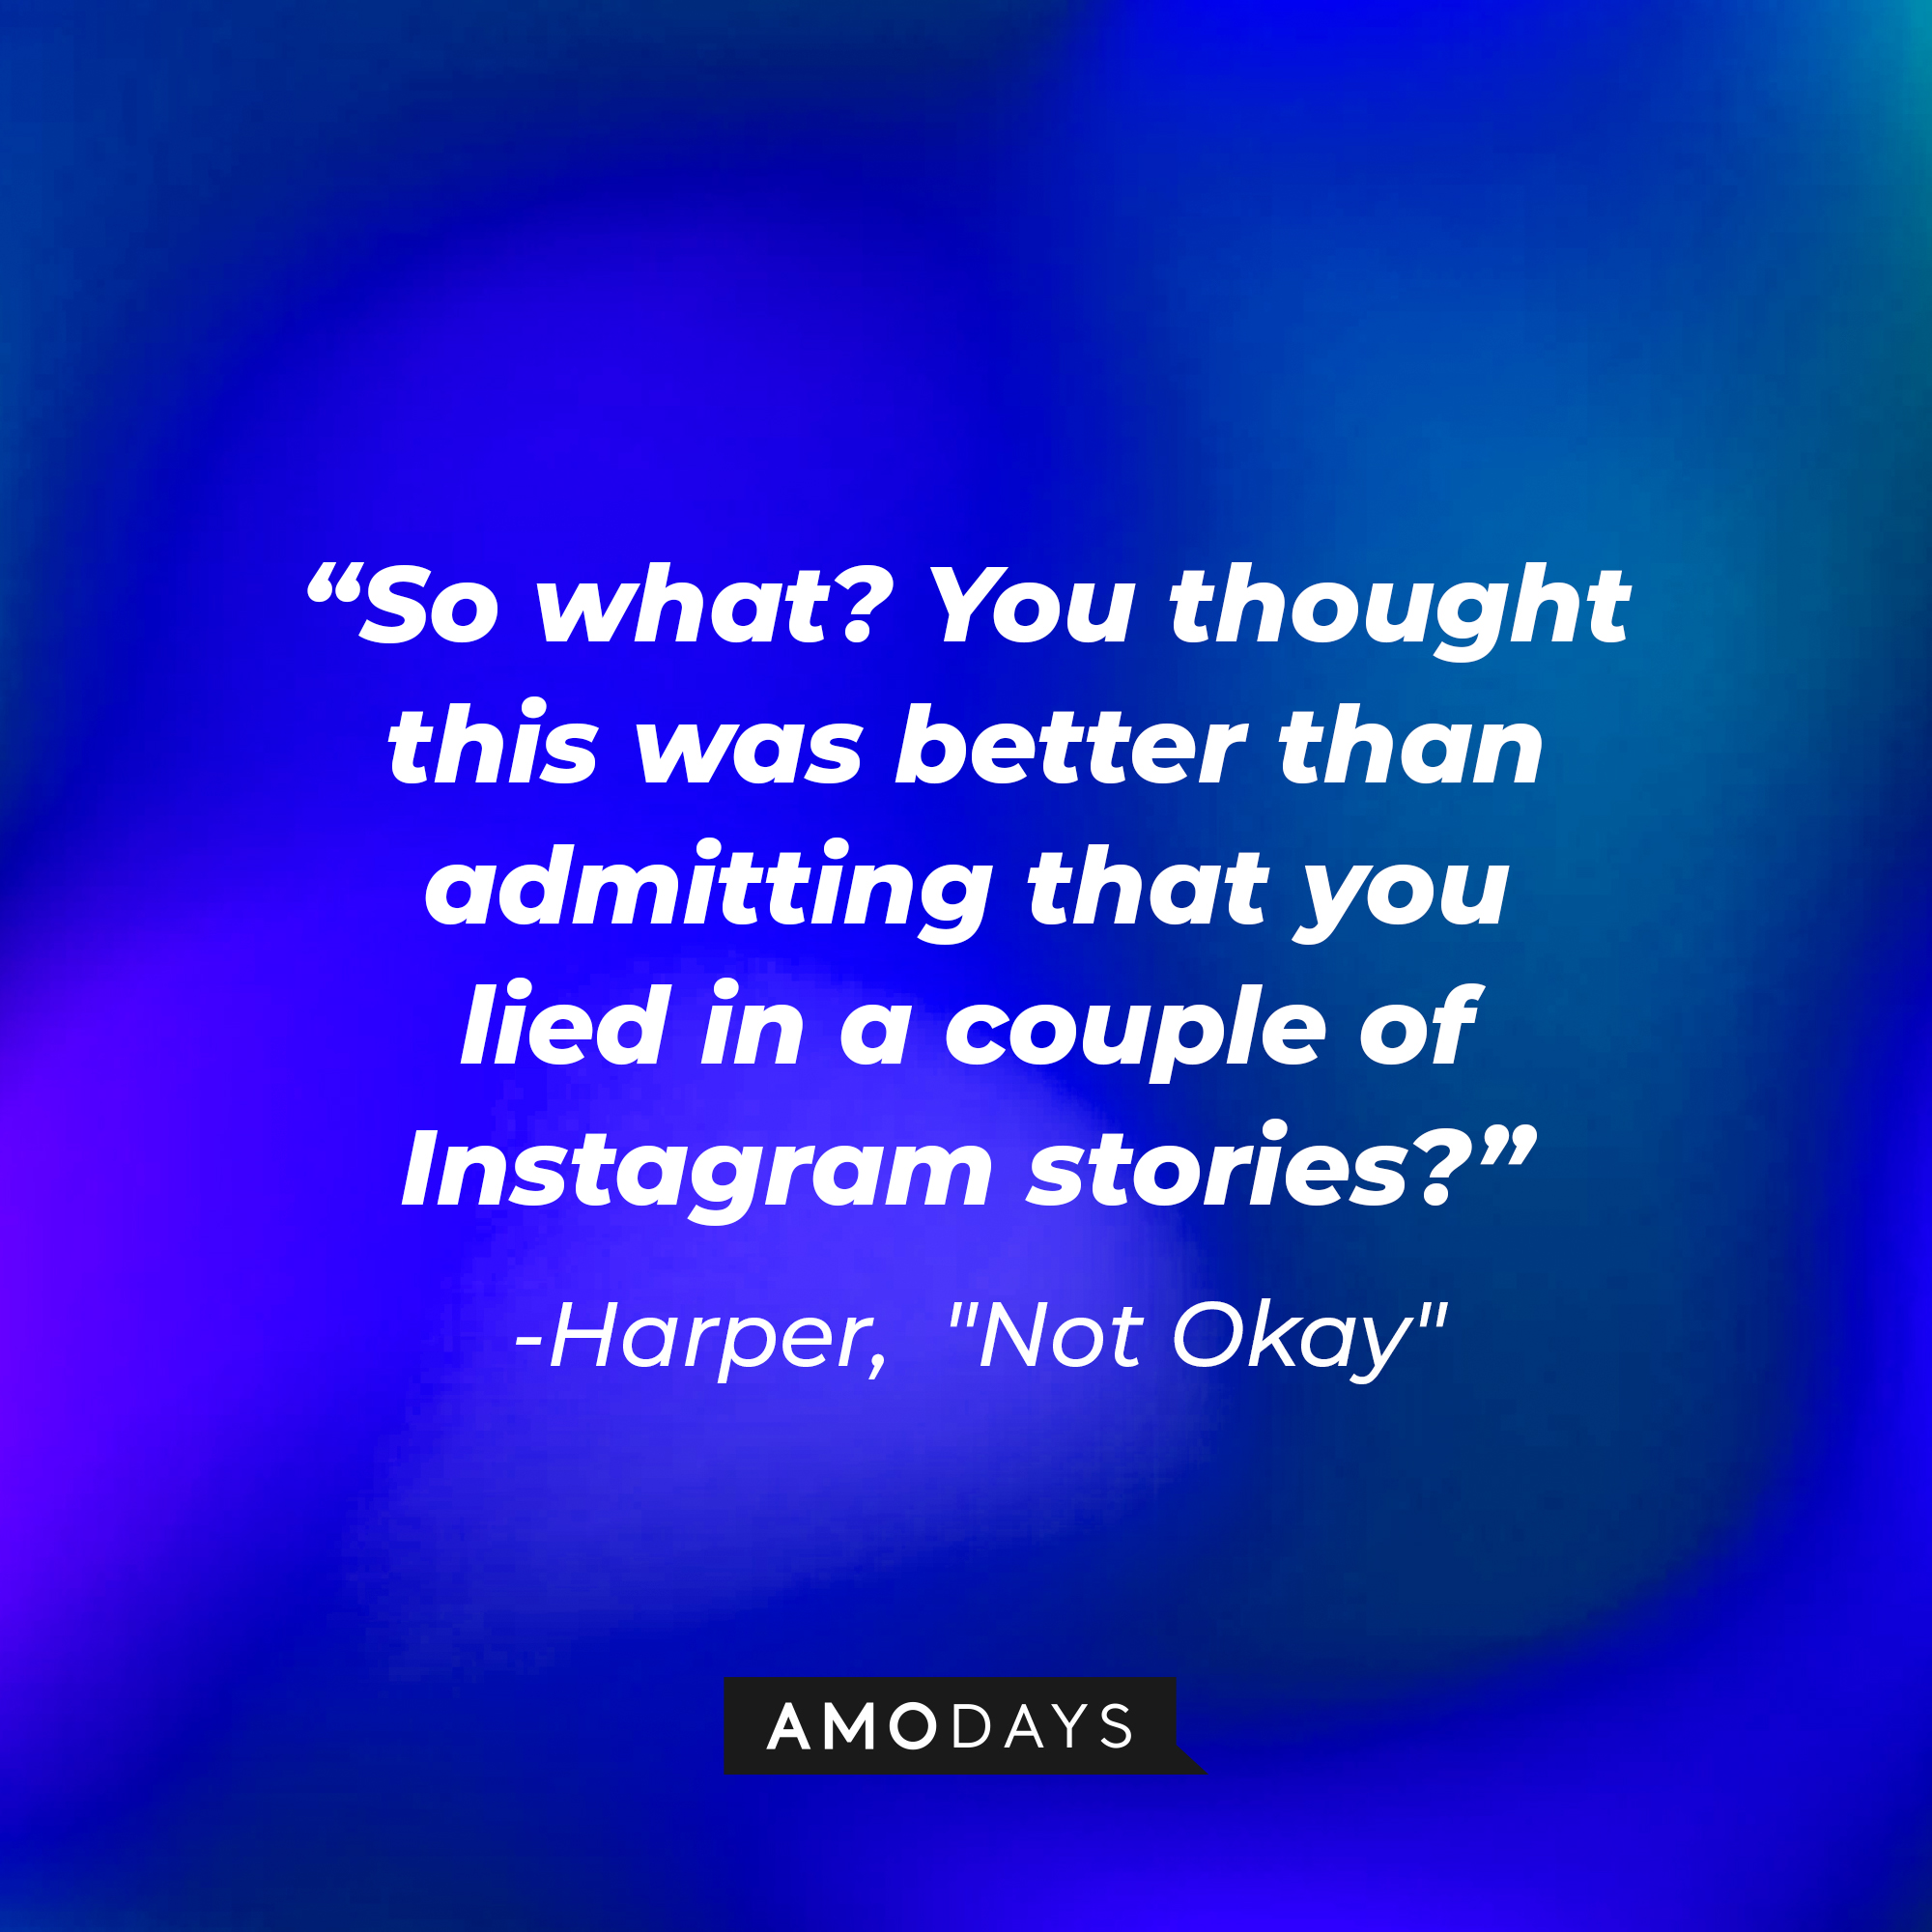 Harper's quote: "So what? You thought this was better than admitting that you lied in a couple of Instagram stories?" | Source: AmoDays